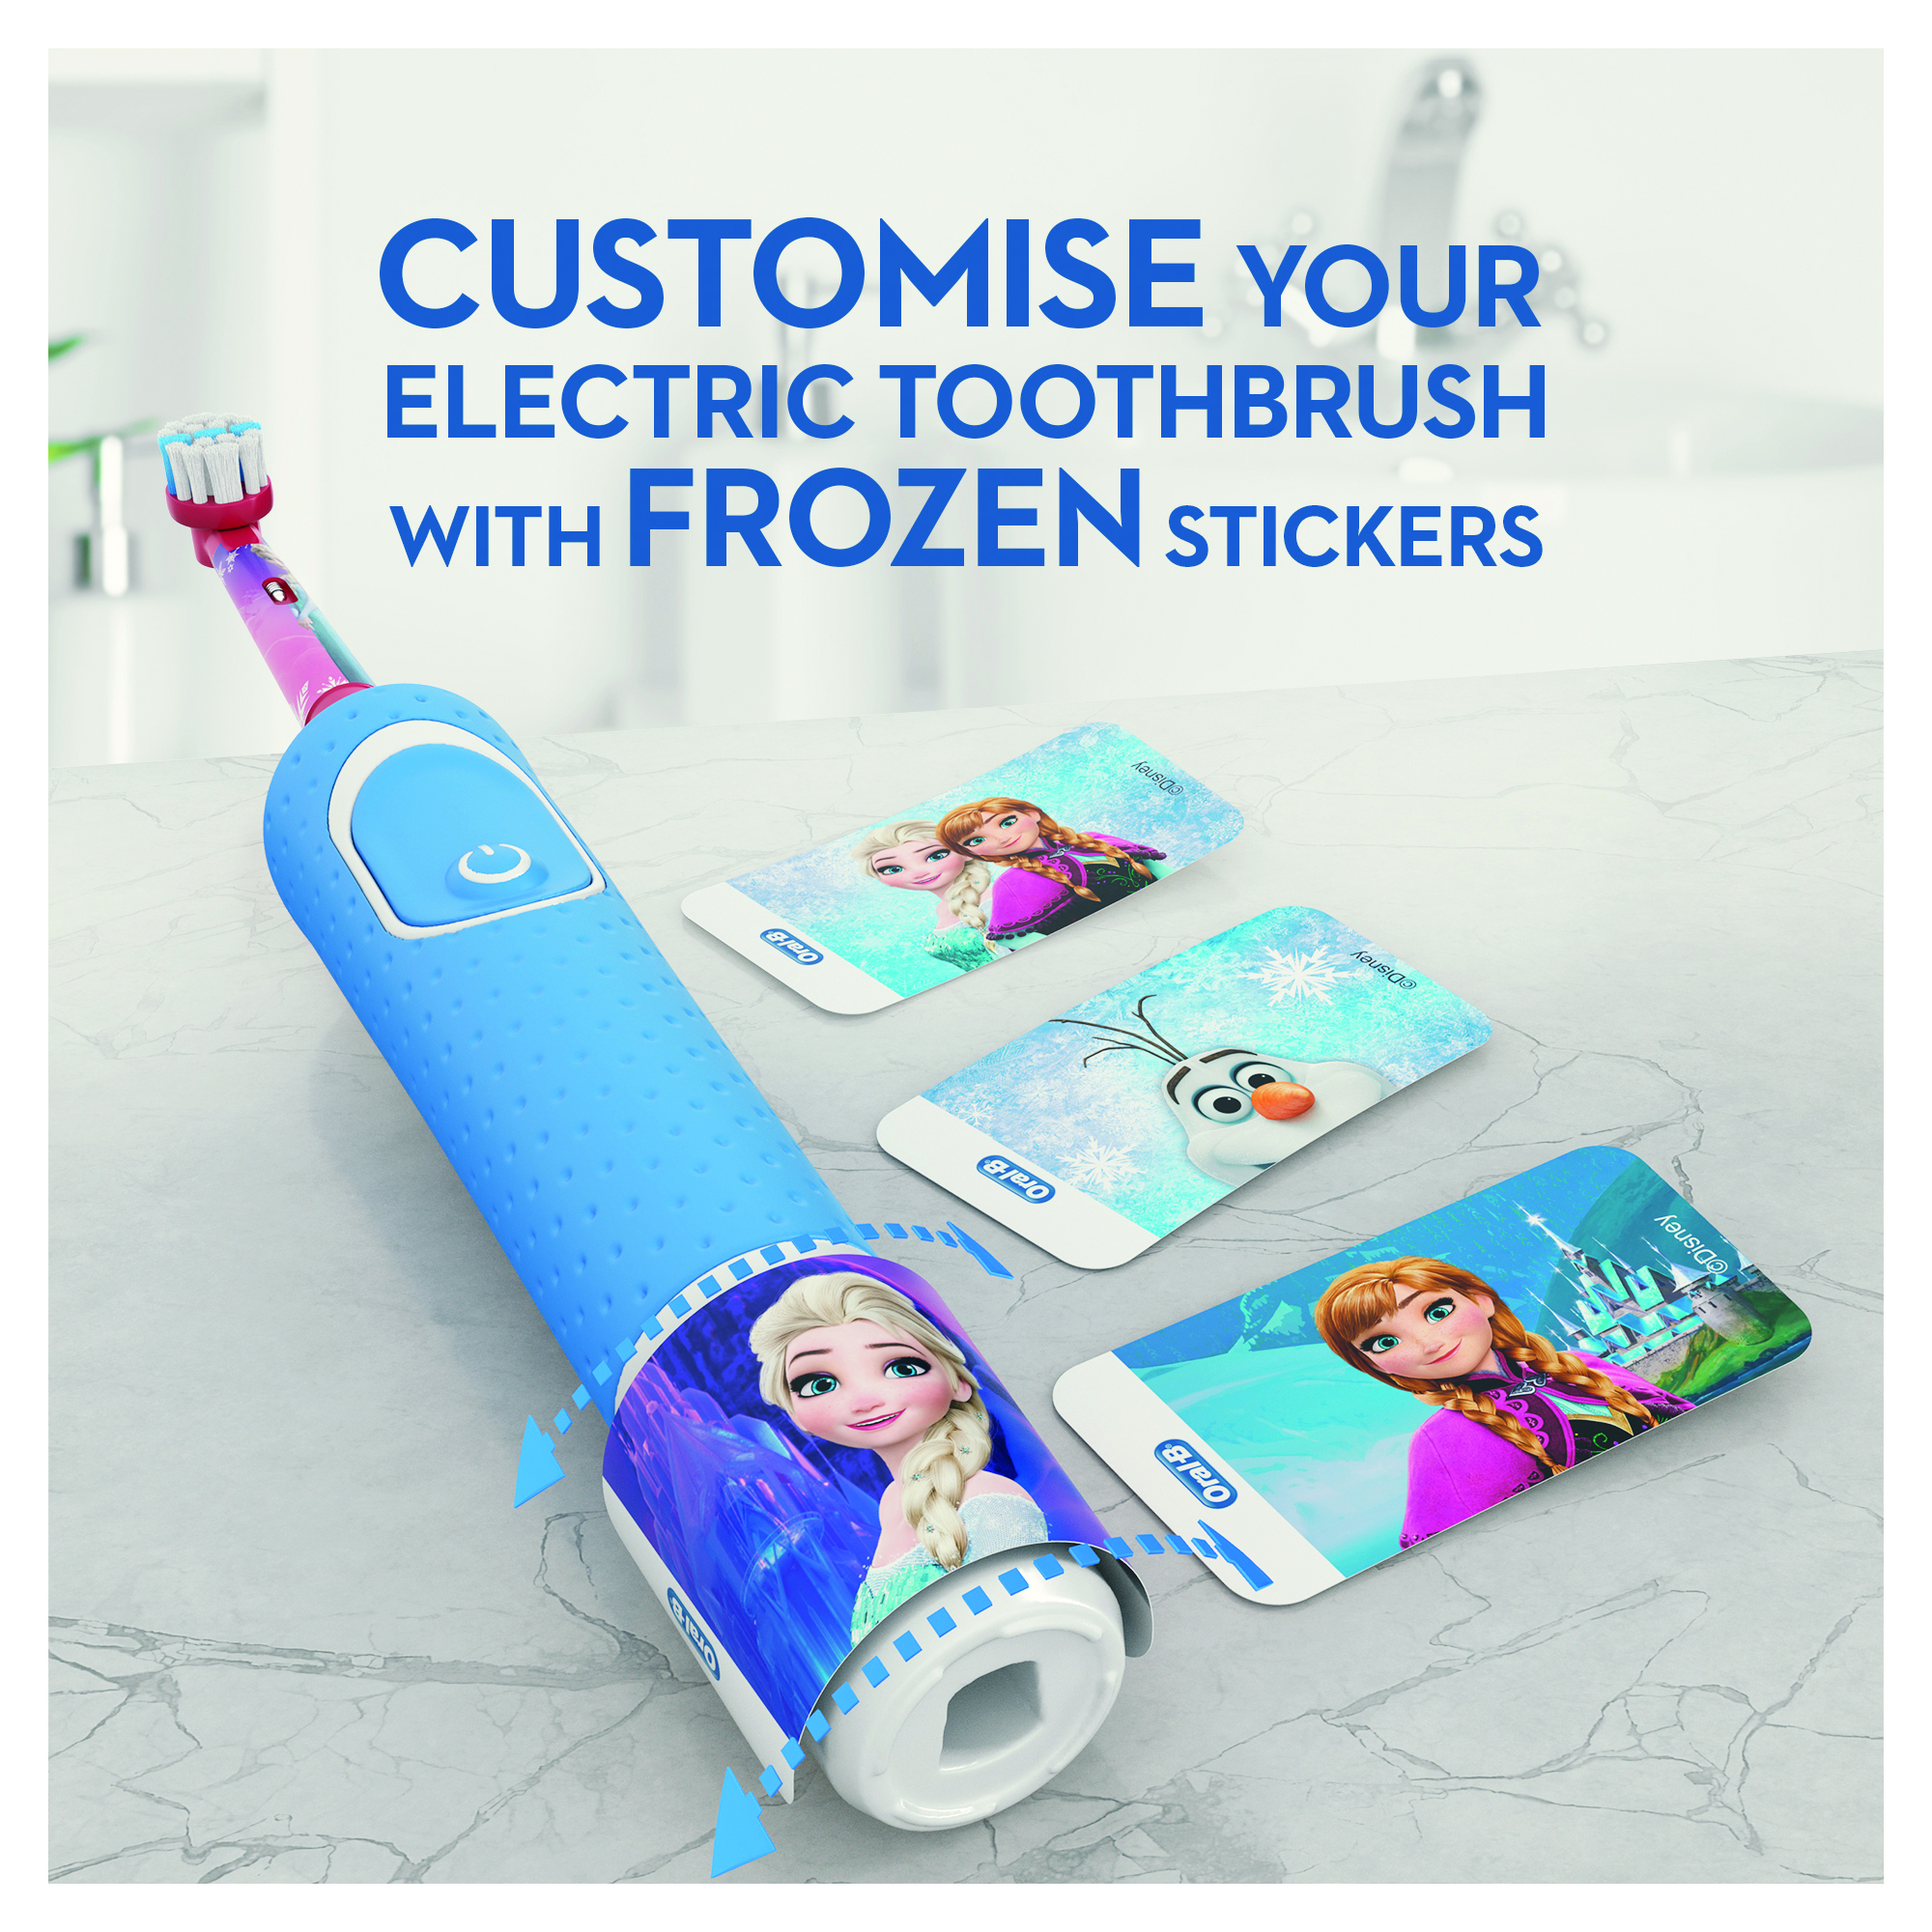 Compatible with several Oral-B toothbrushes